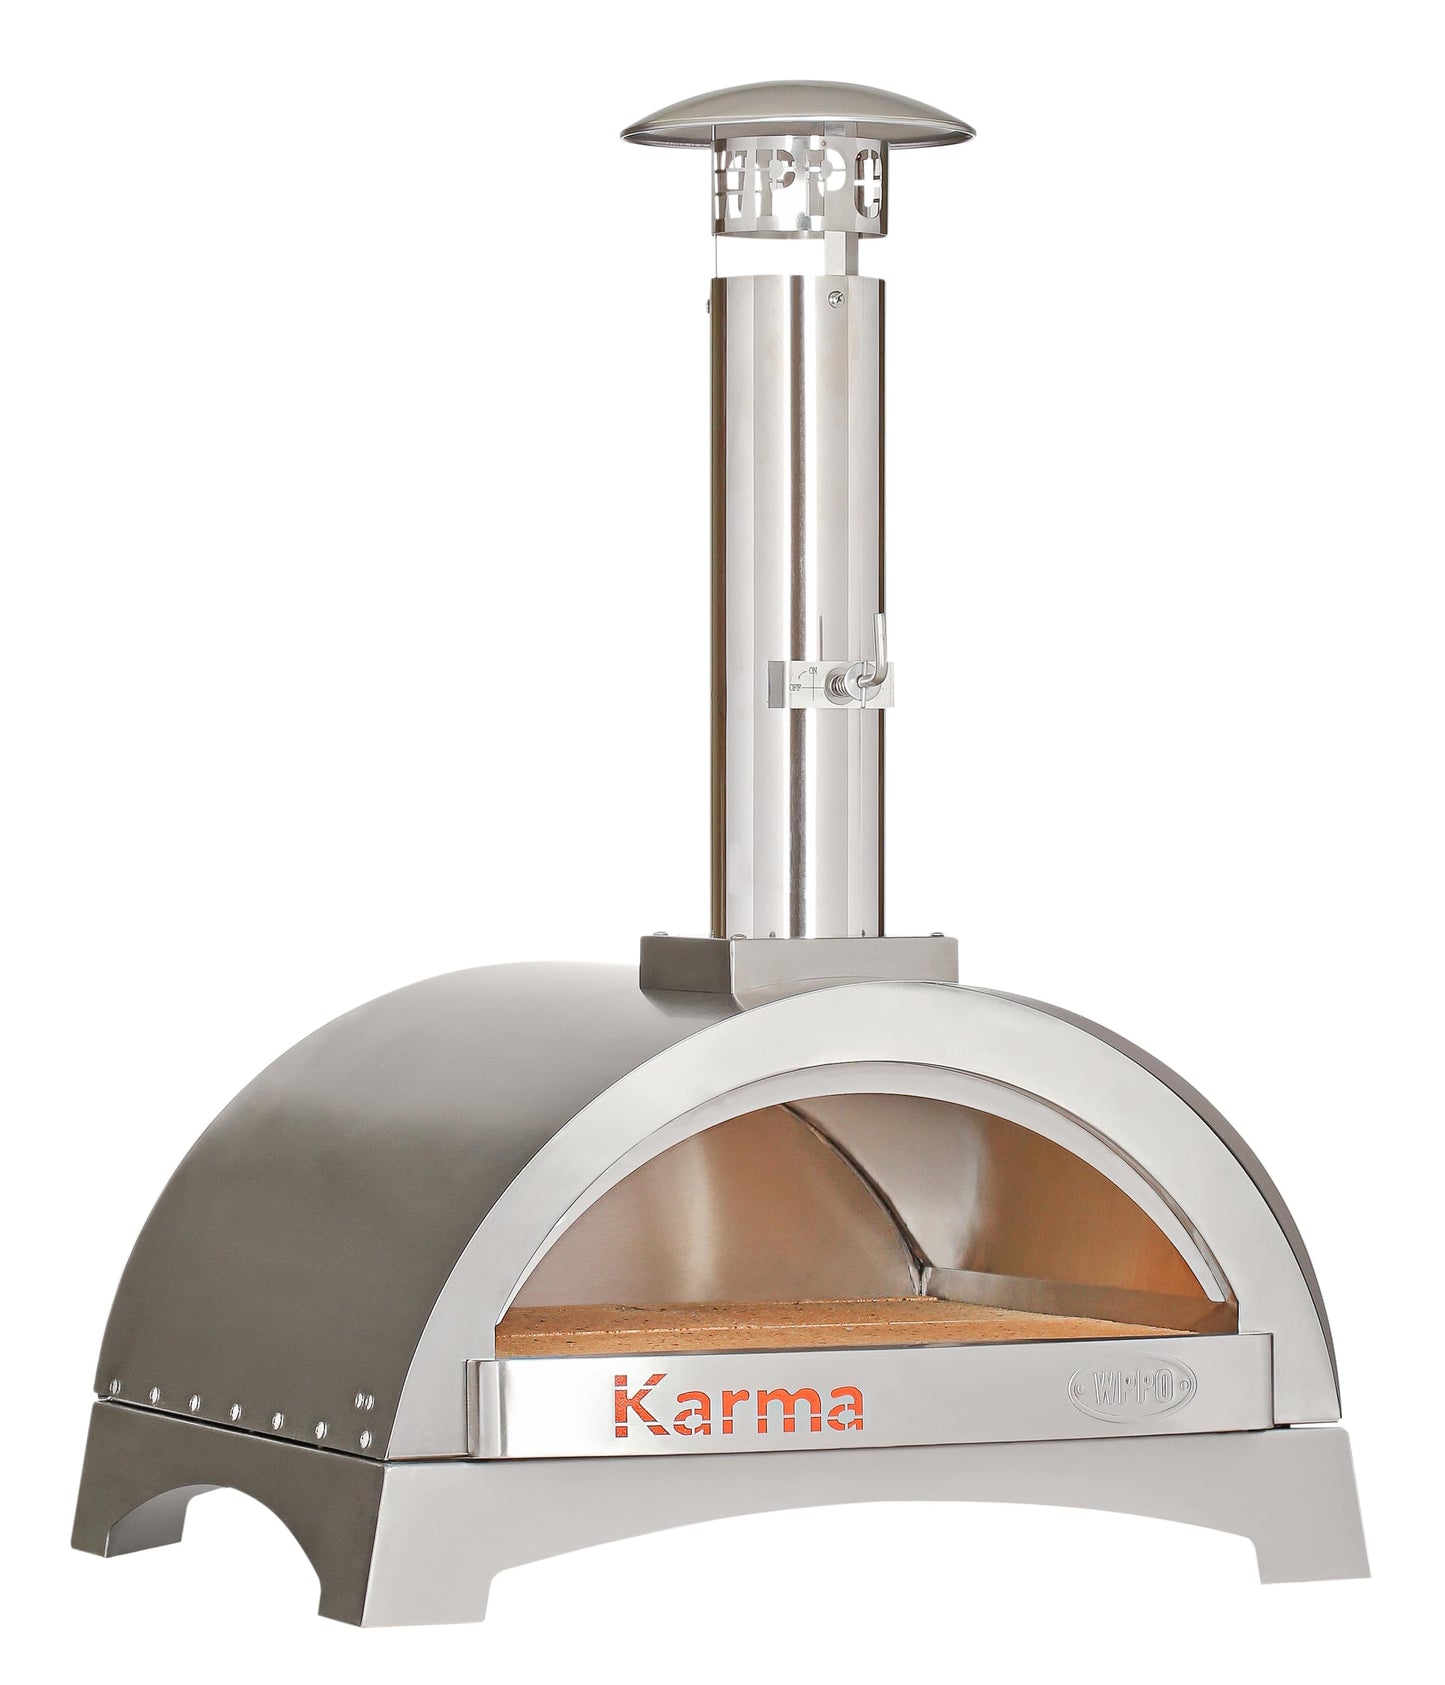 WPPO Karma 25" Stainless Steel Oven with Base-Novel Home